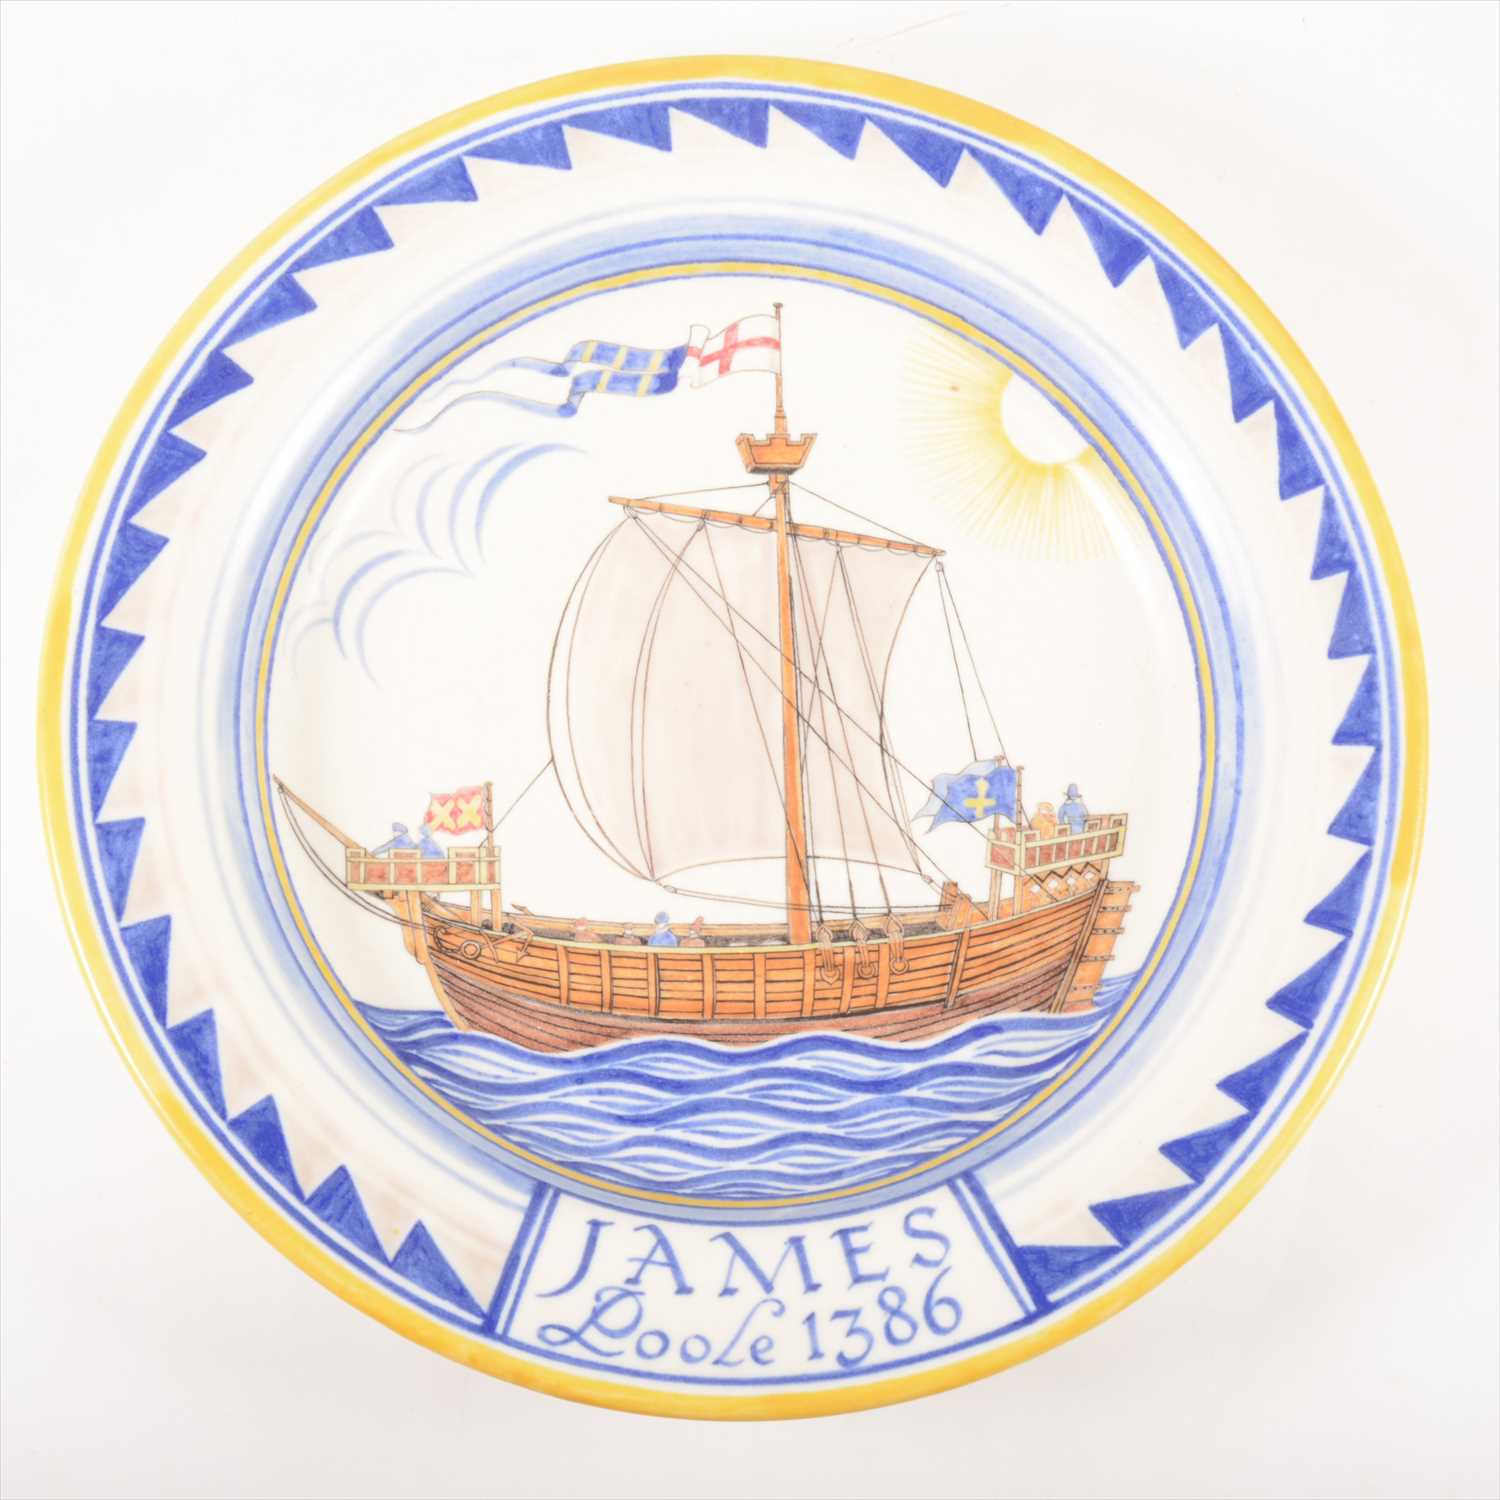 Lot 165 - 'James, Poole 1386', a red-bodied dish by Poole Pottery, 1934.